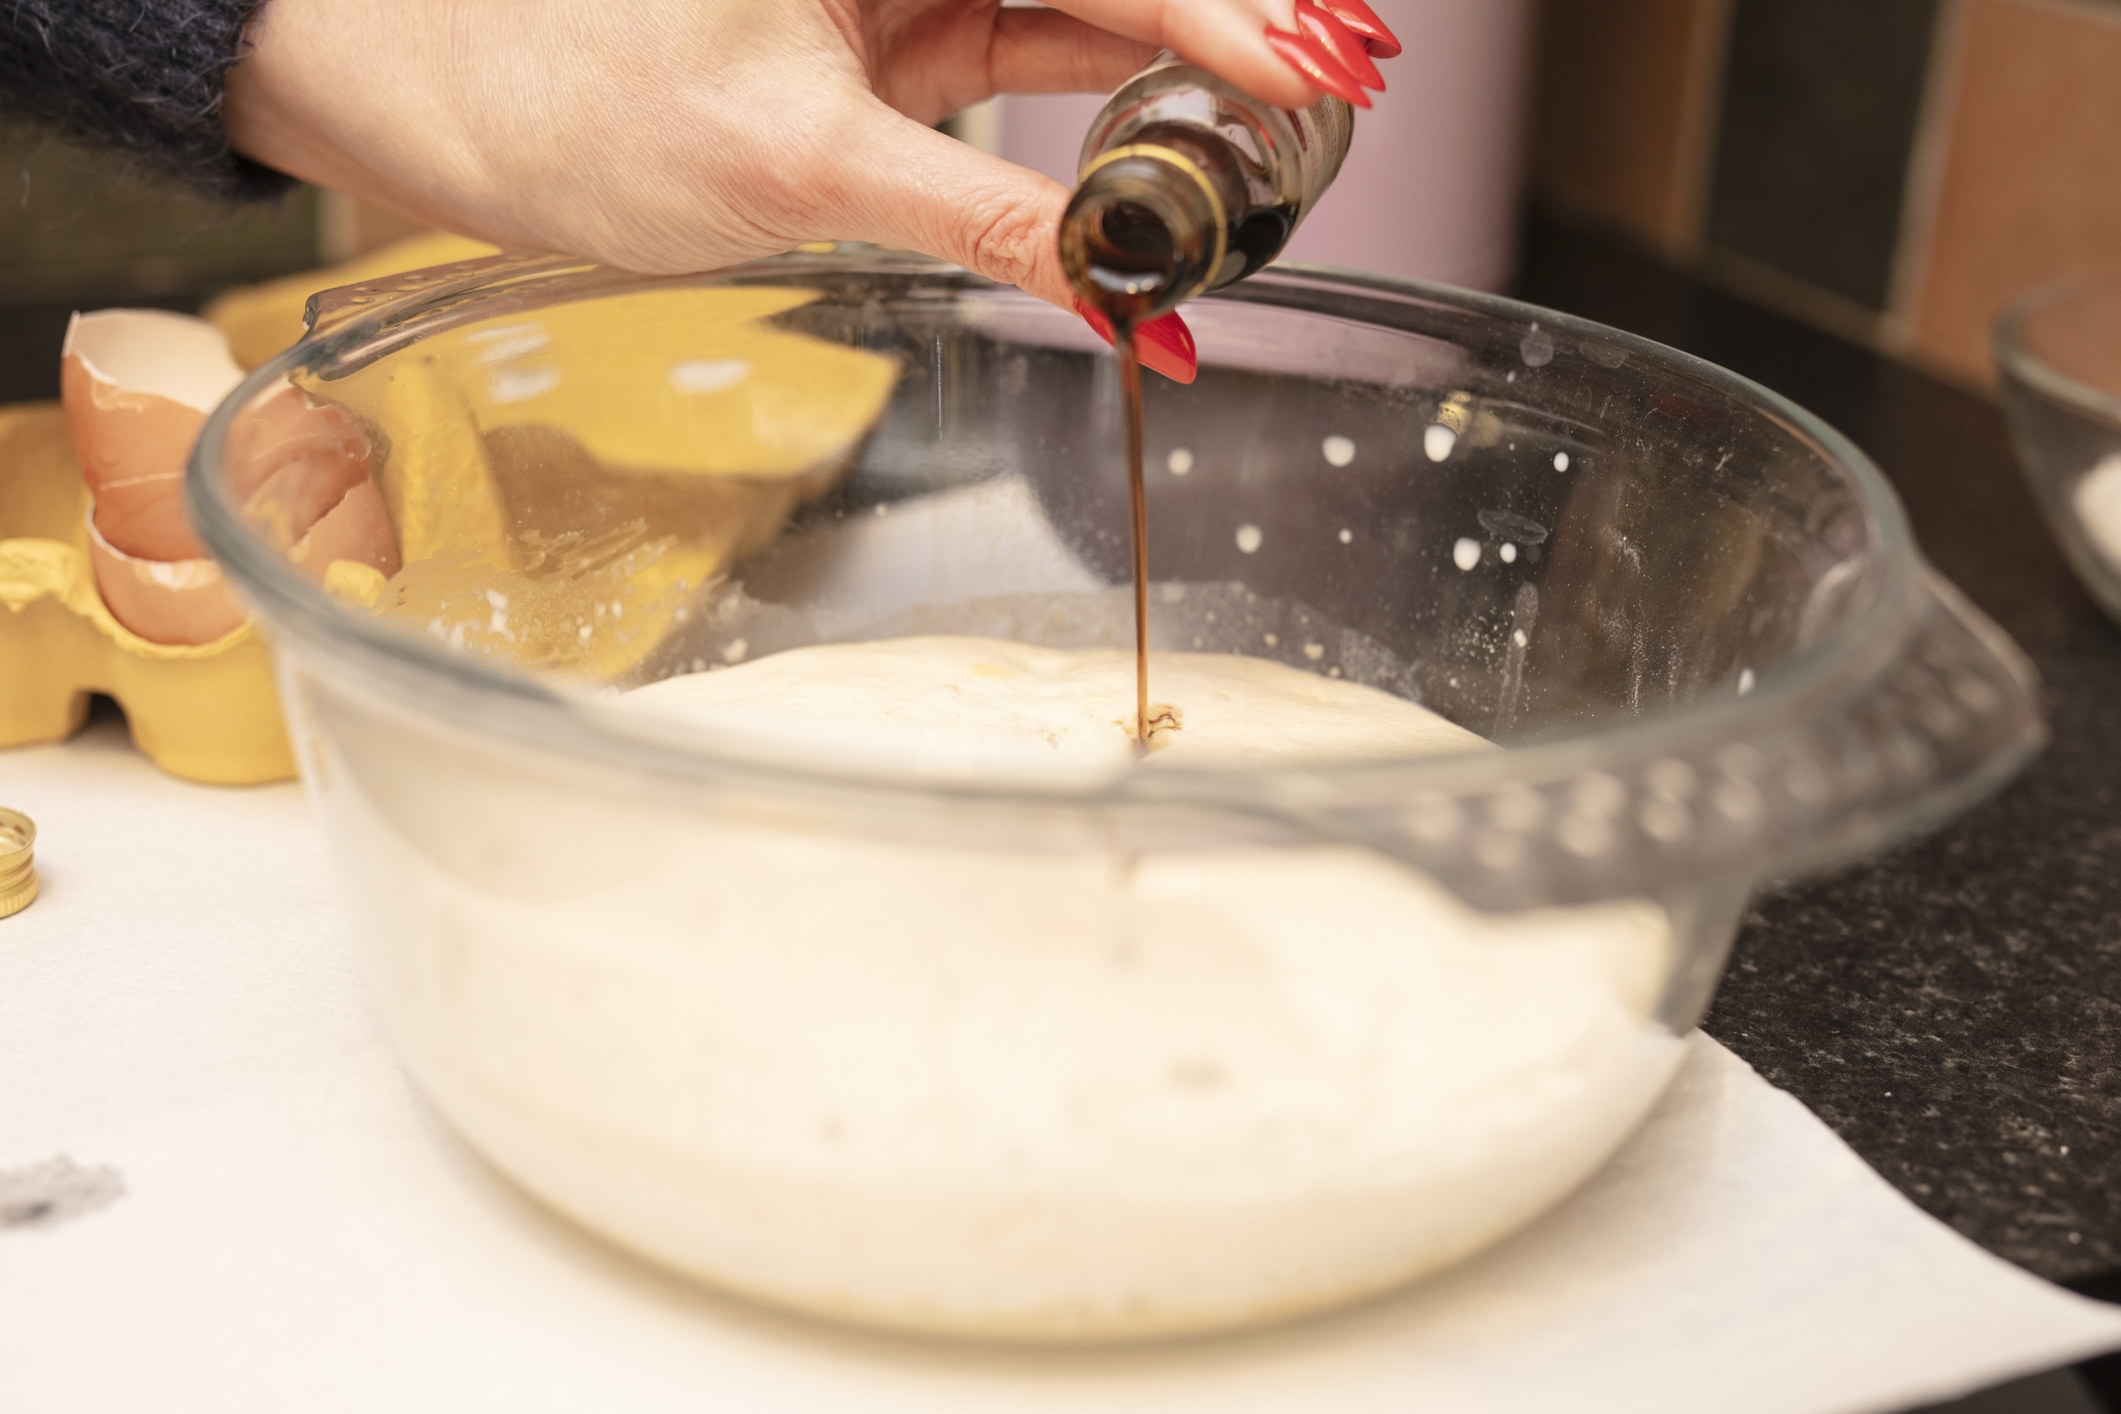 Pouring vanilla extract into a bowl of batter.